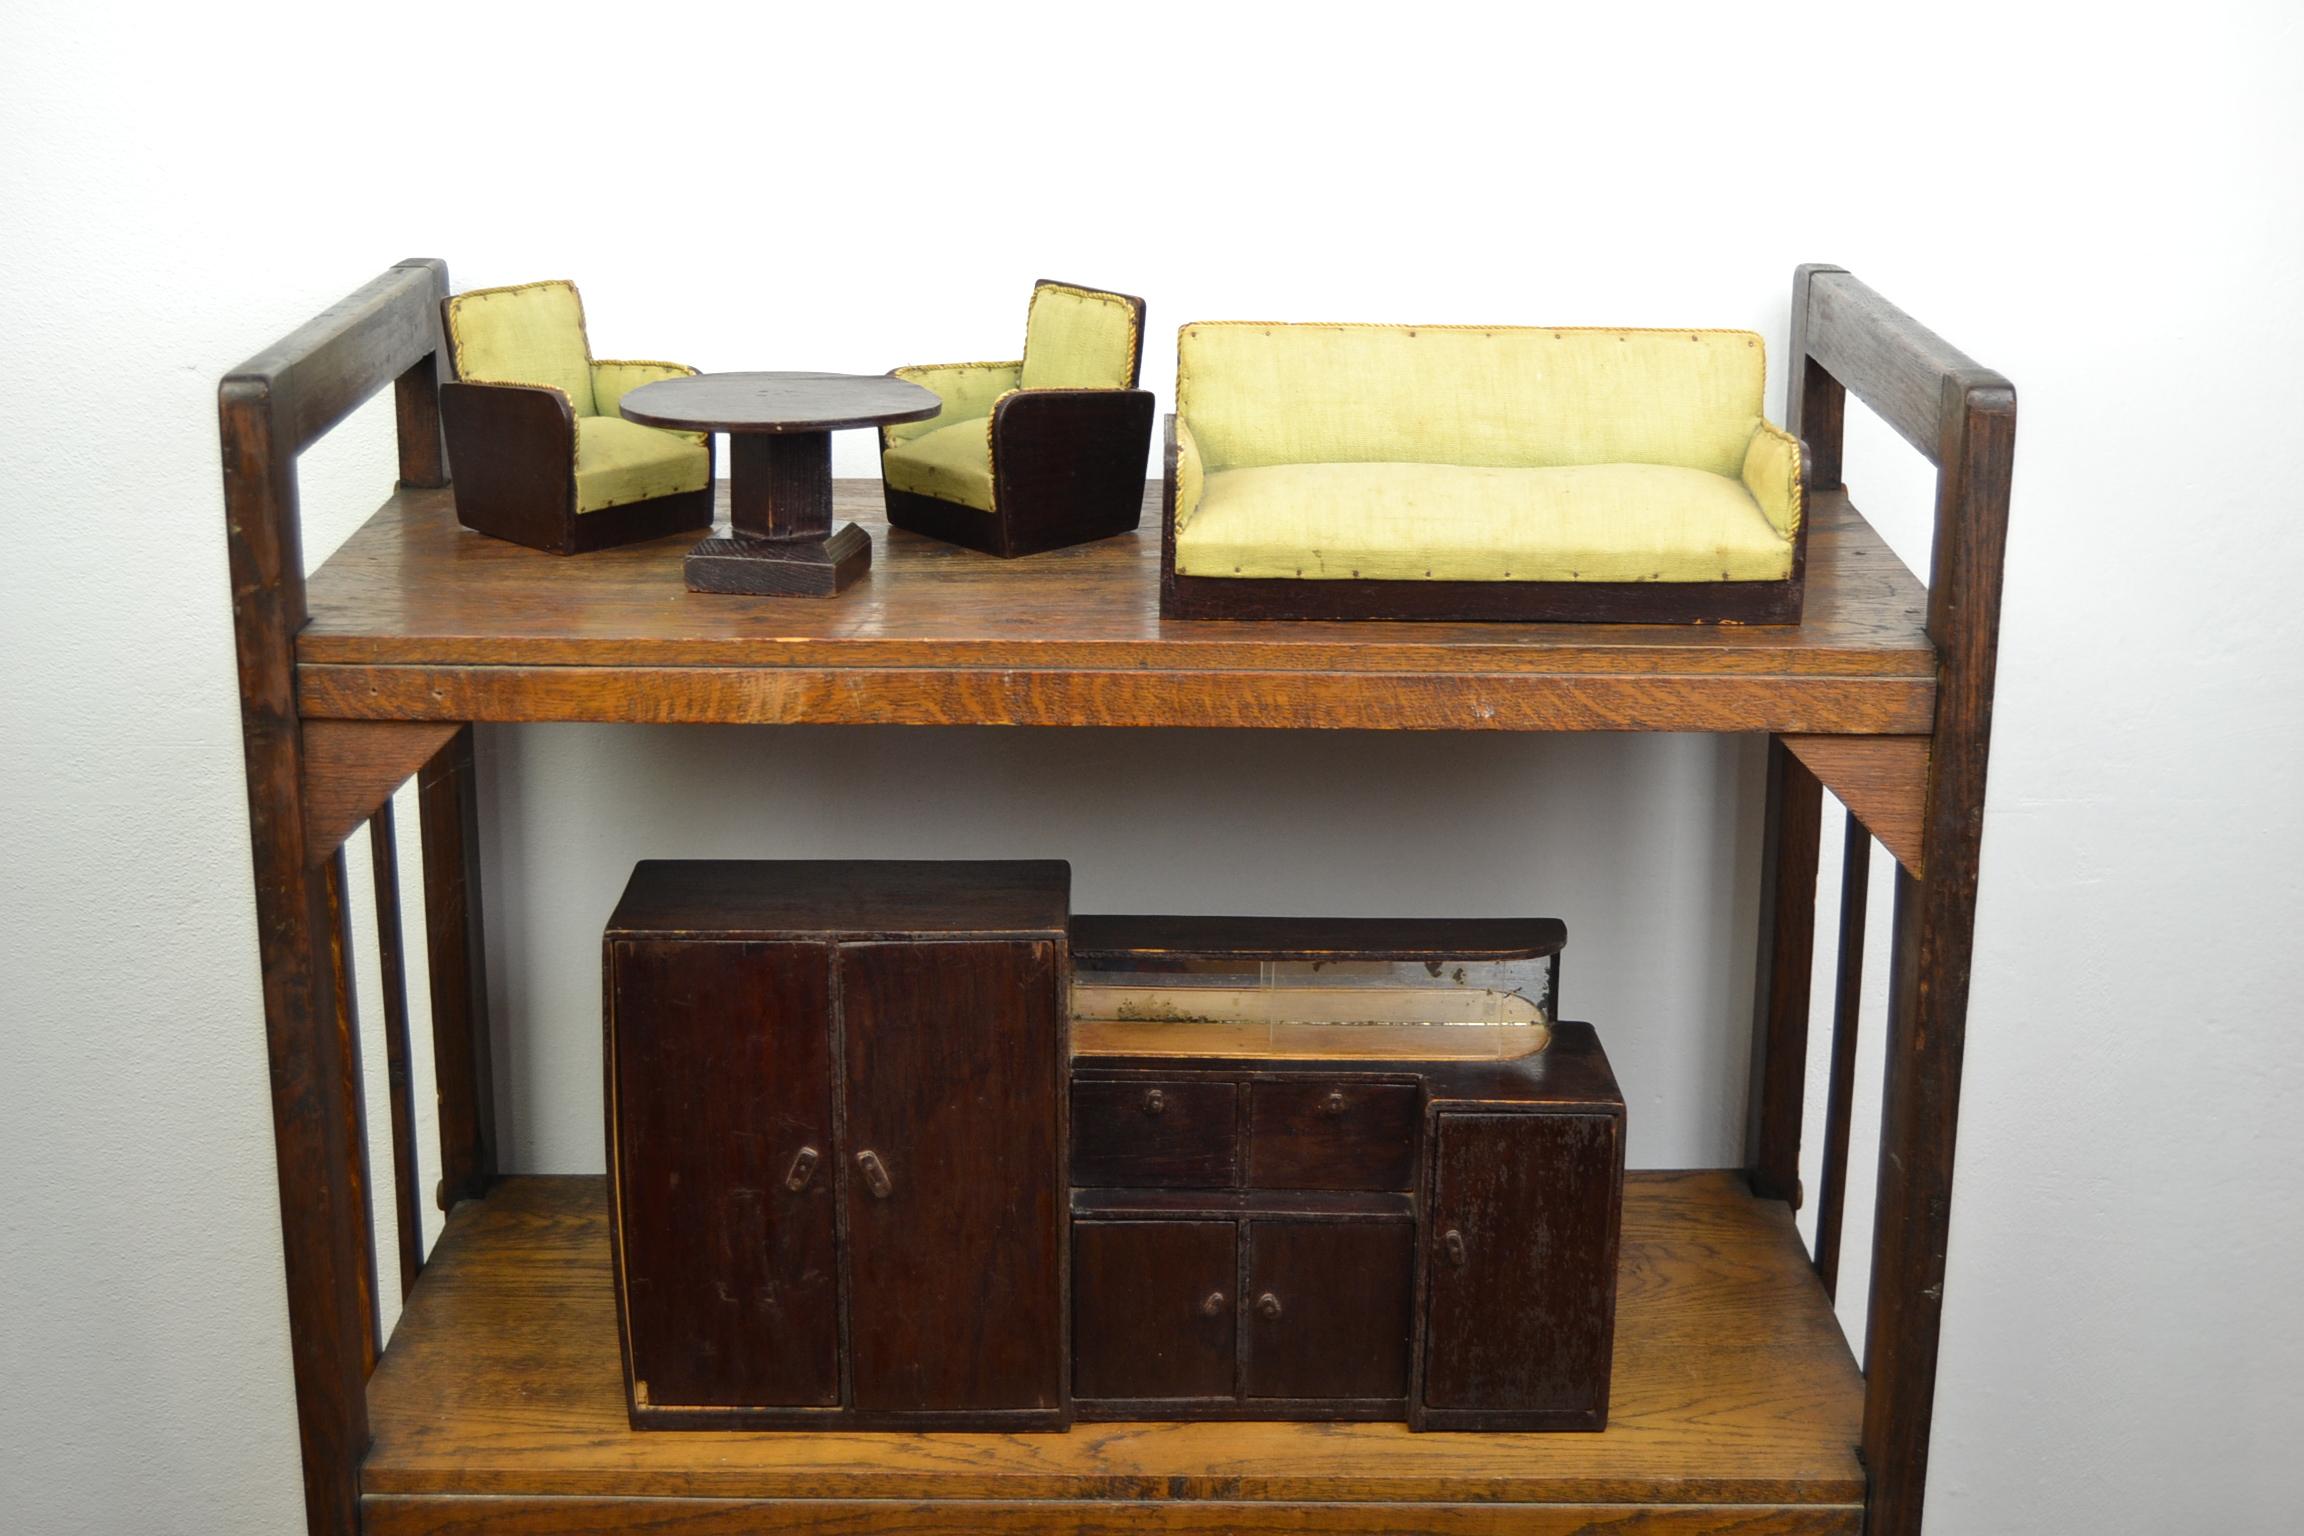 Miniature Art Deco furniture.
Large scale wooden models of an Art Deco cabinet,
Art Deco 3-seat and 2 Art Deco club chairs with Art Deco coffee table.
This dining- room set, living room set is very detailed.
The club chairs and seat have green